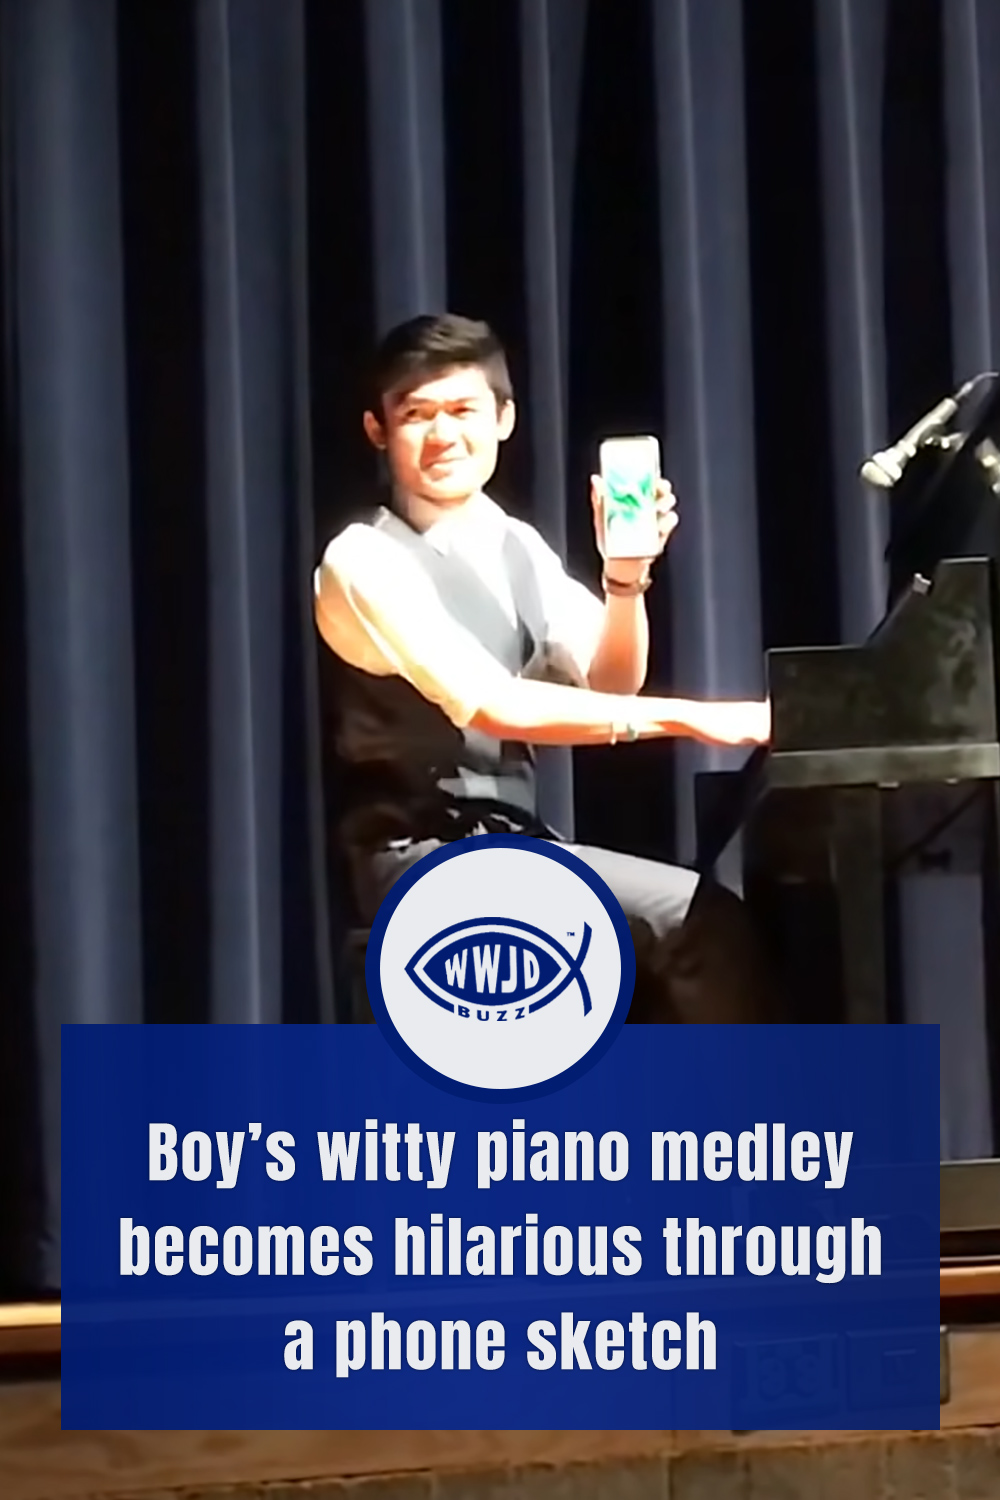 Boy’s witty piano medley becomes hilarious through a phone sketch